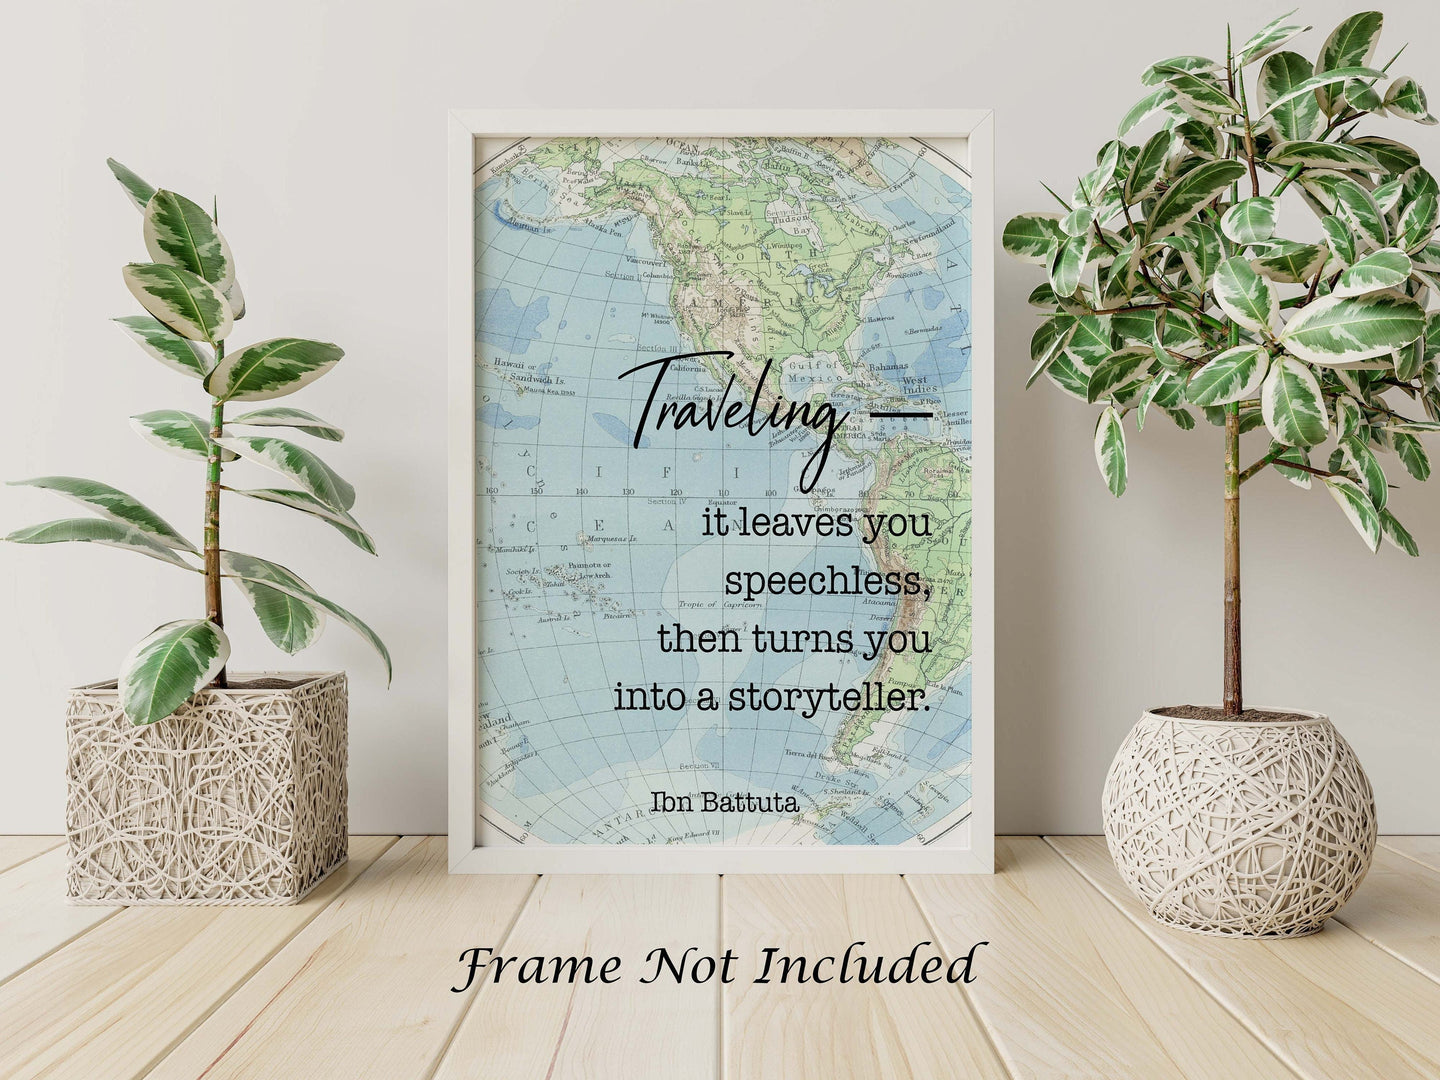 Ibn Battuta Travel Quote- Traveling it leaves you speechless, then turns you into a storyteller - Physical Print Without Frame